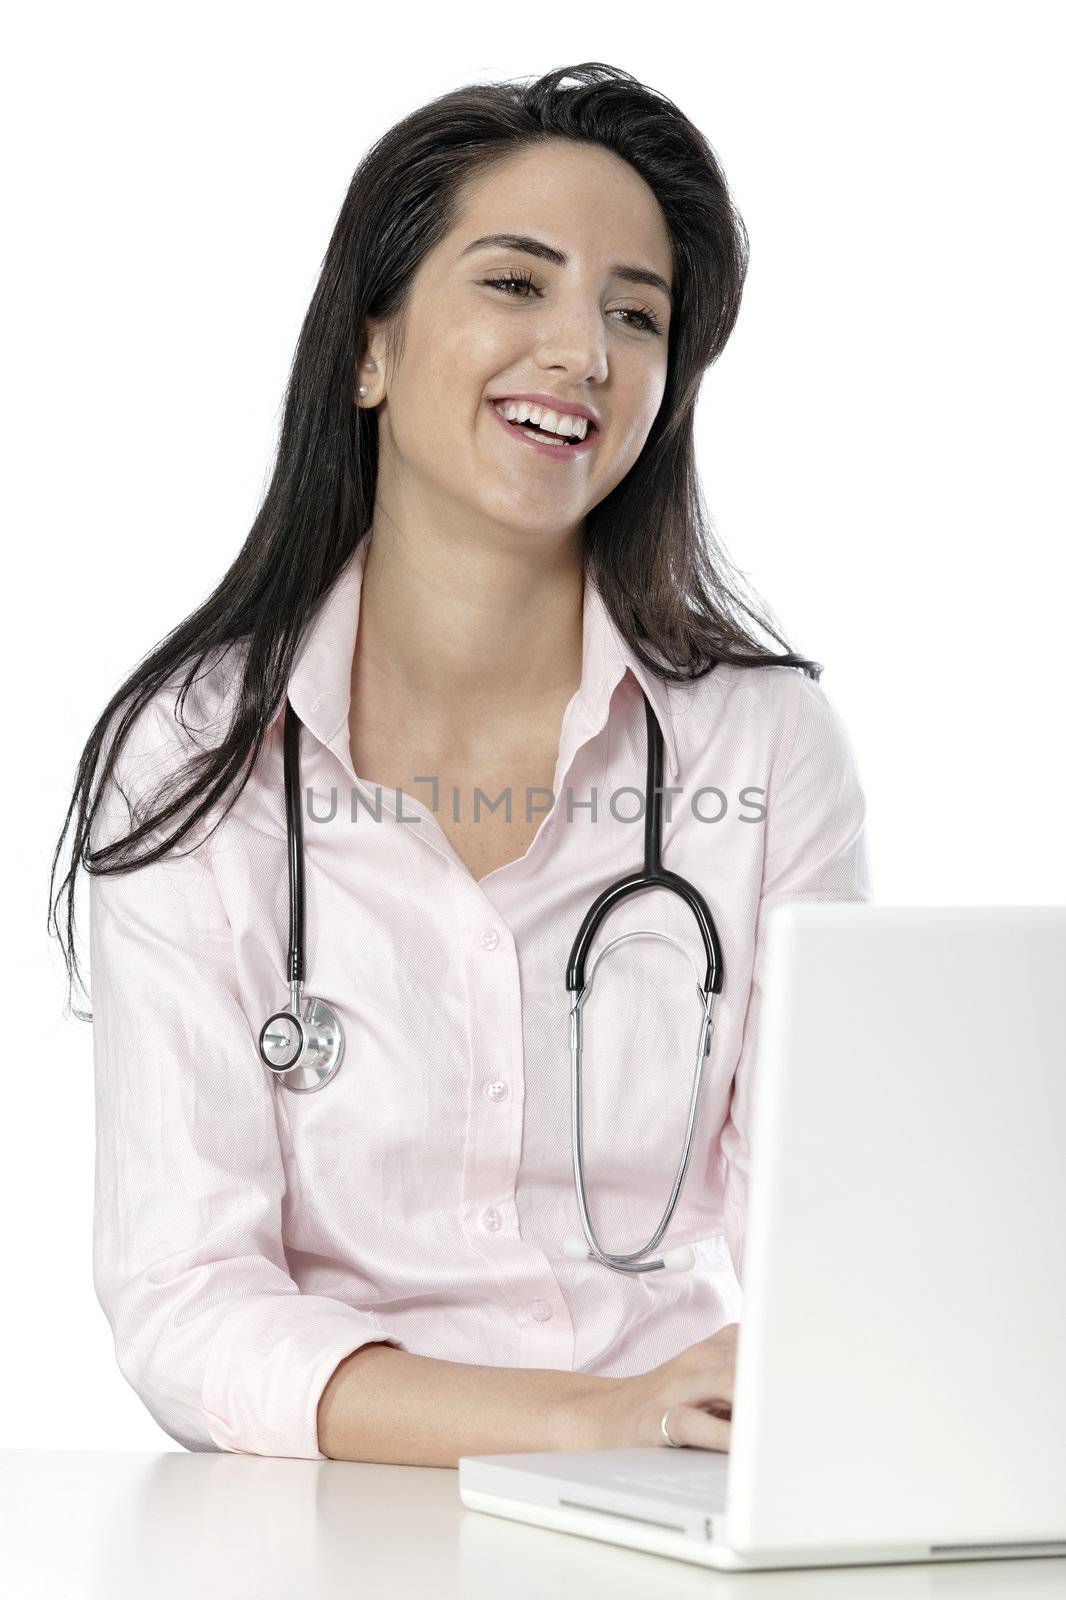 Beautiful young doctor sat smiling at her work desk using her computer.